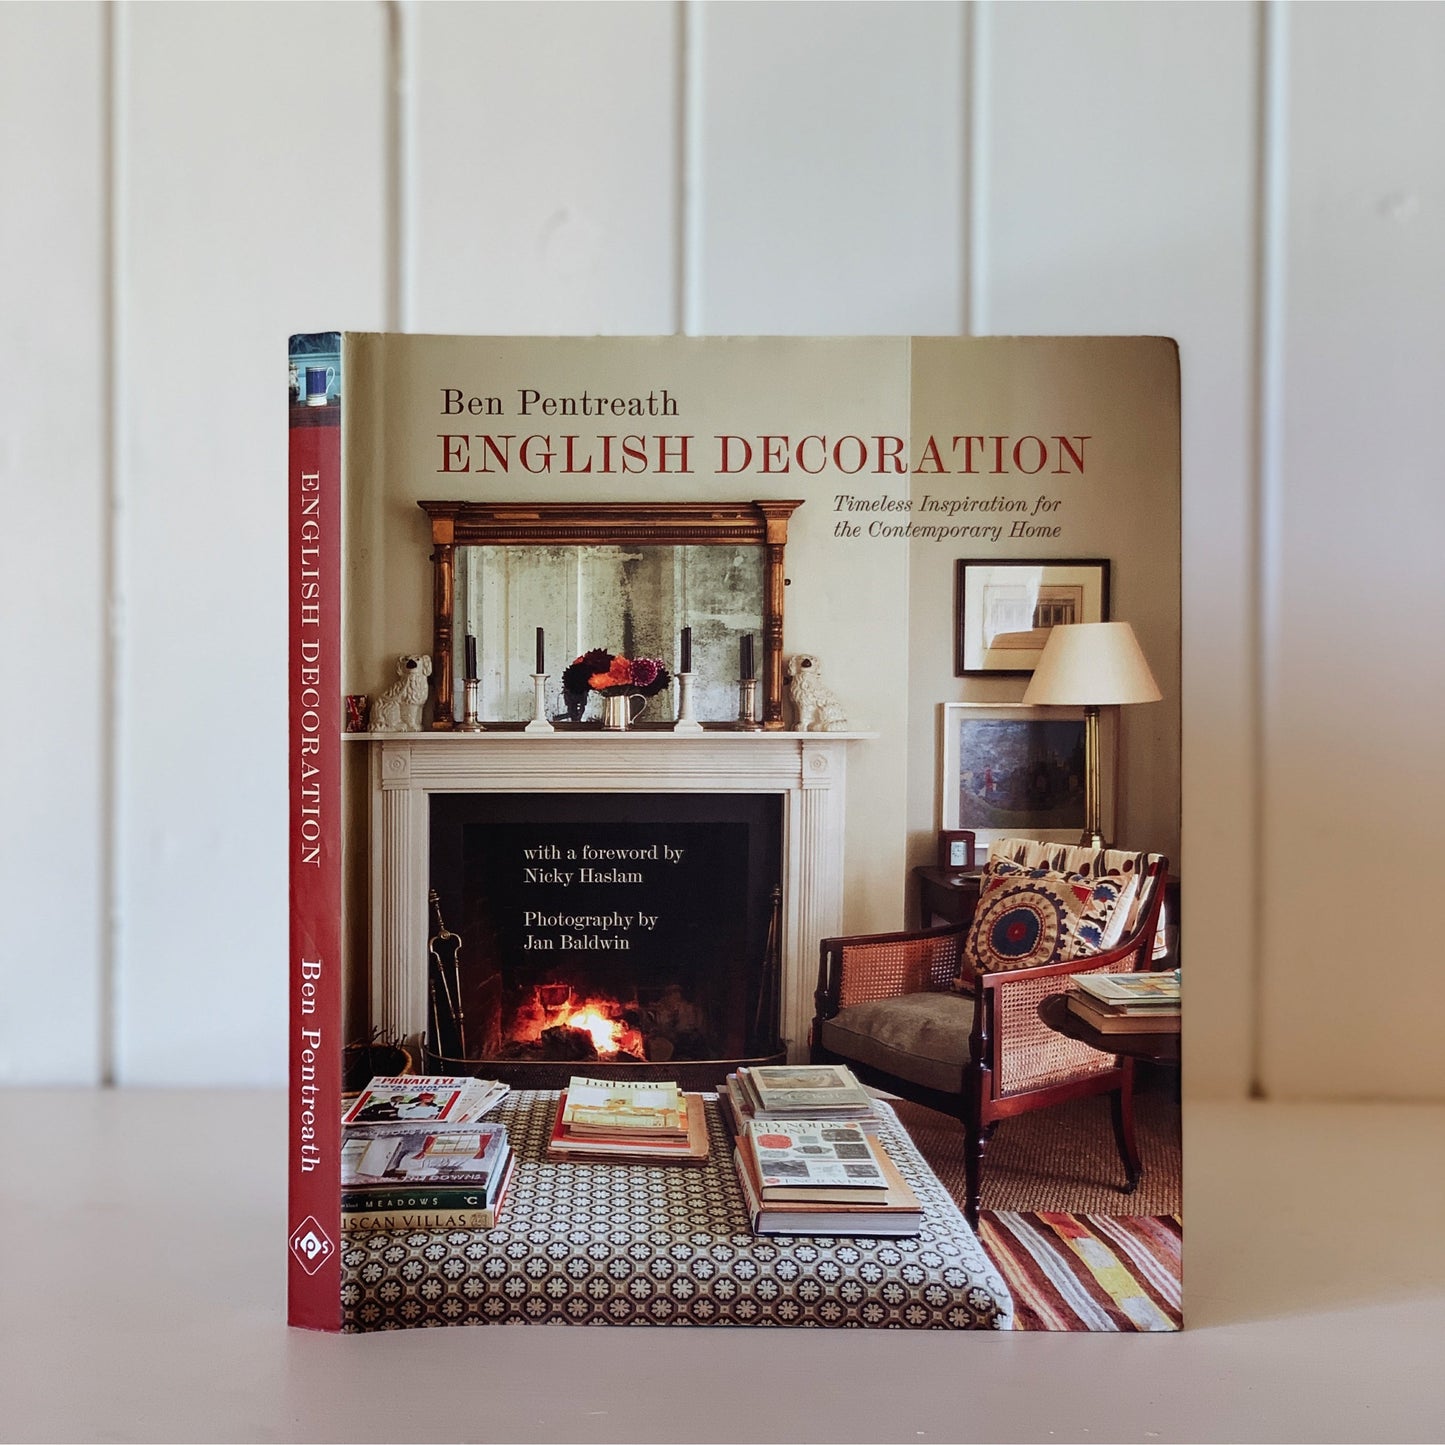 English Decoration - Timeless Inspiration for the Contemporary Home, Ben Pentreath , 2019